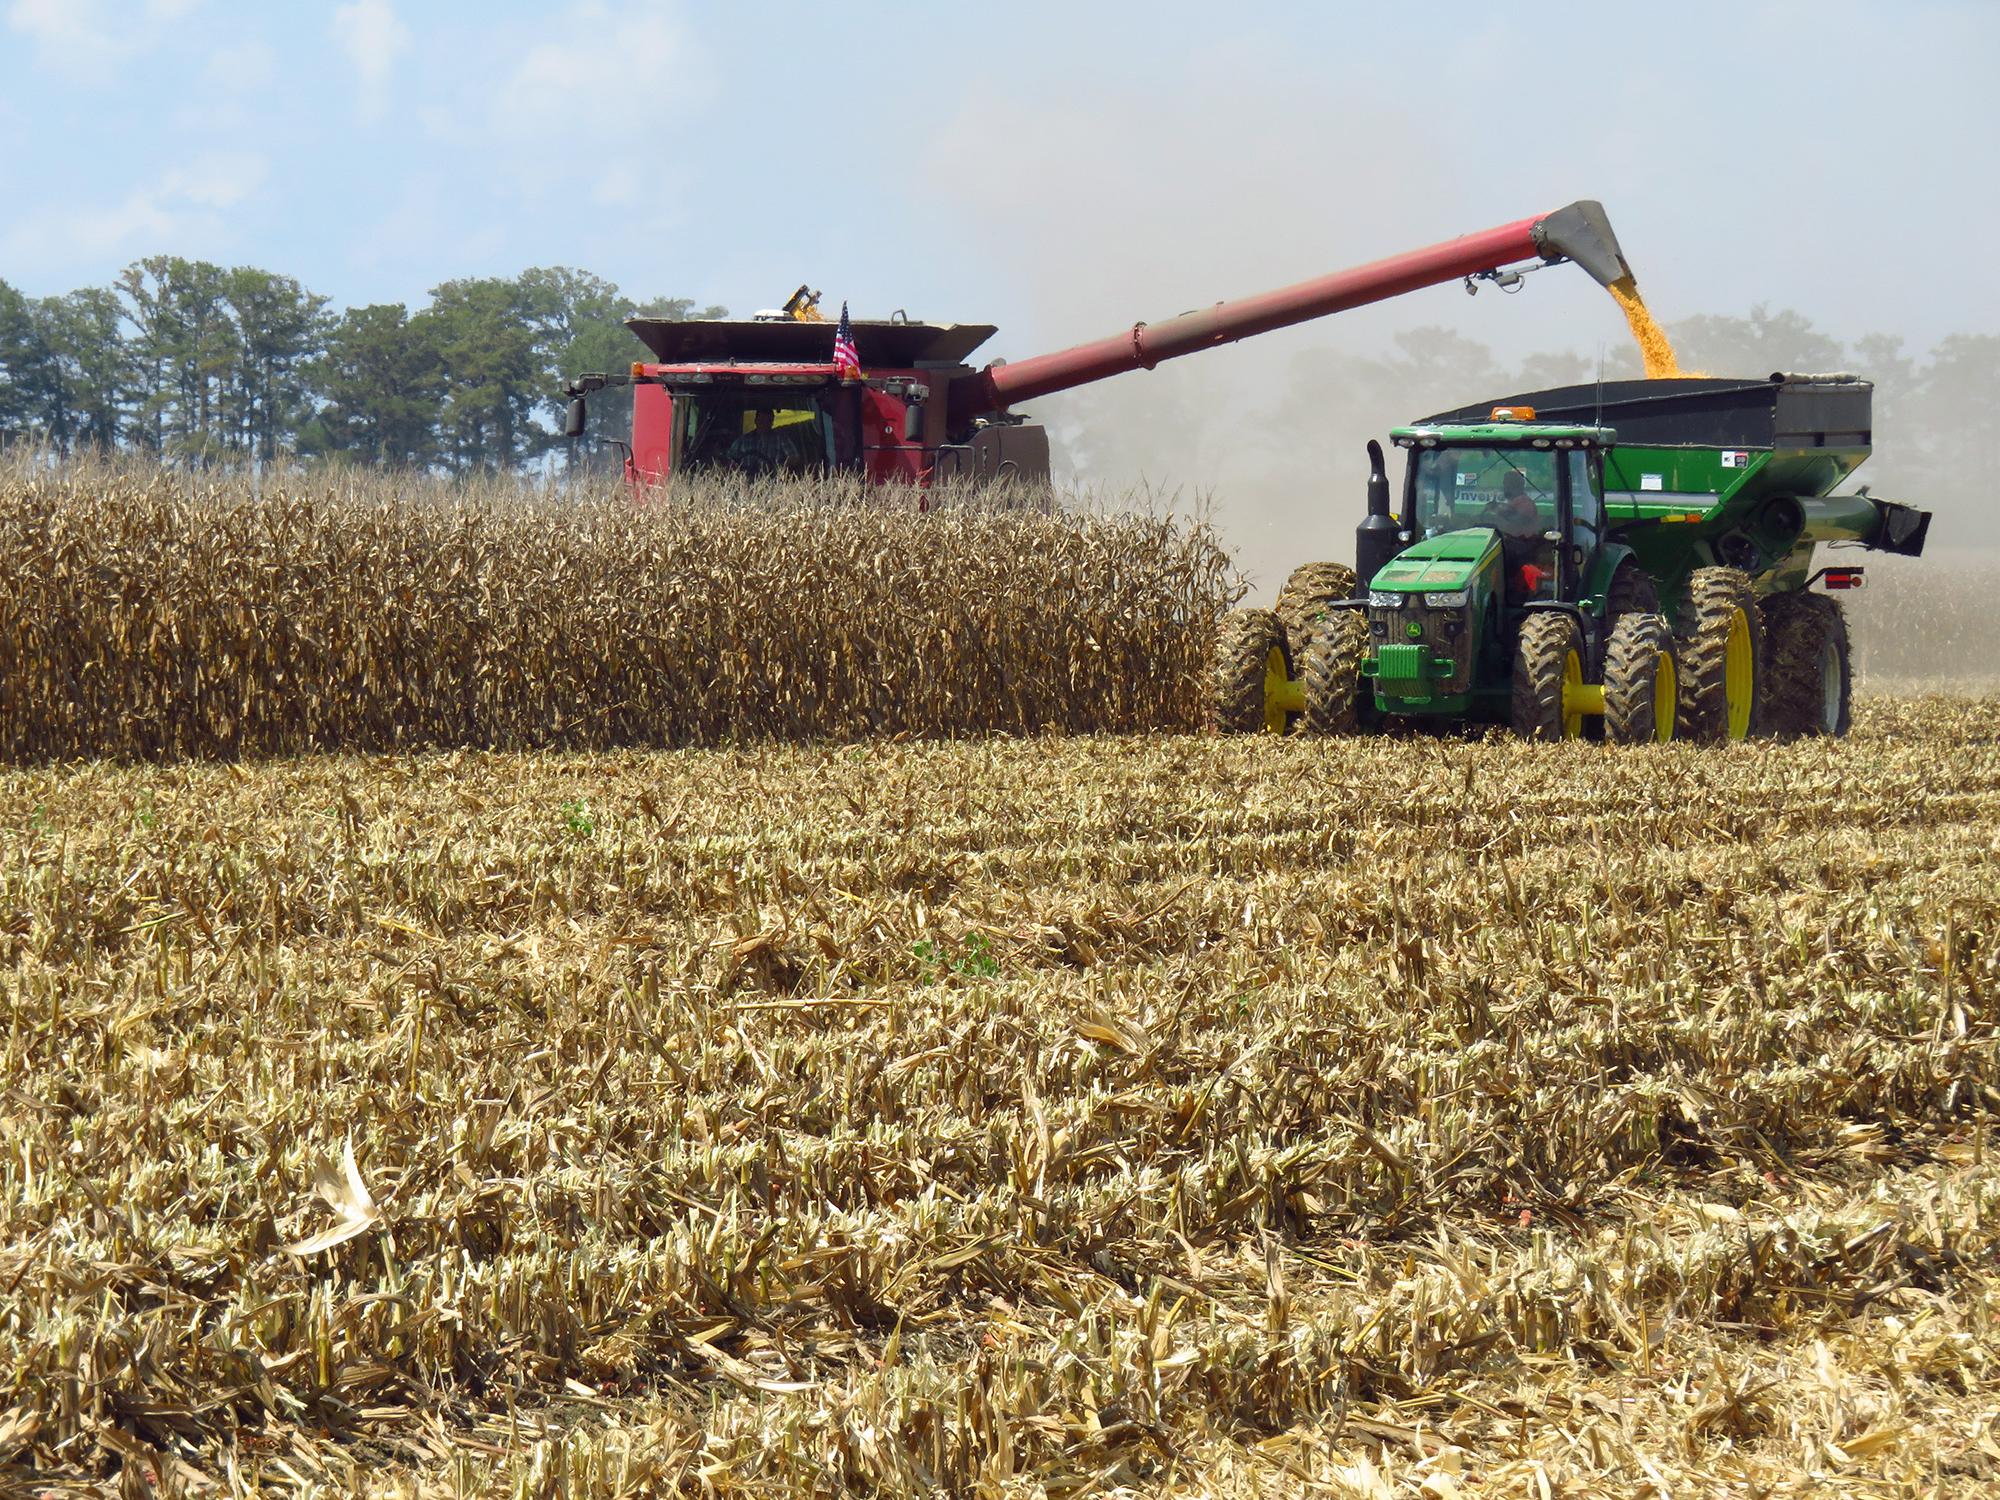 Despite rain delays, corn harvest is in full swing across Mississippi on fields such as this one on a Leflore County farm in Morgan City on Aug. 24, 2016. (Photo by MSU Extension Service/Erick Larson)